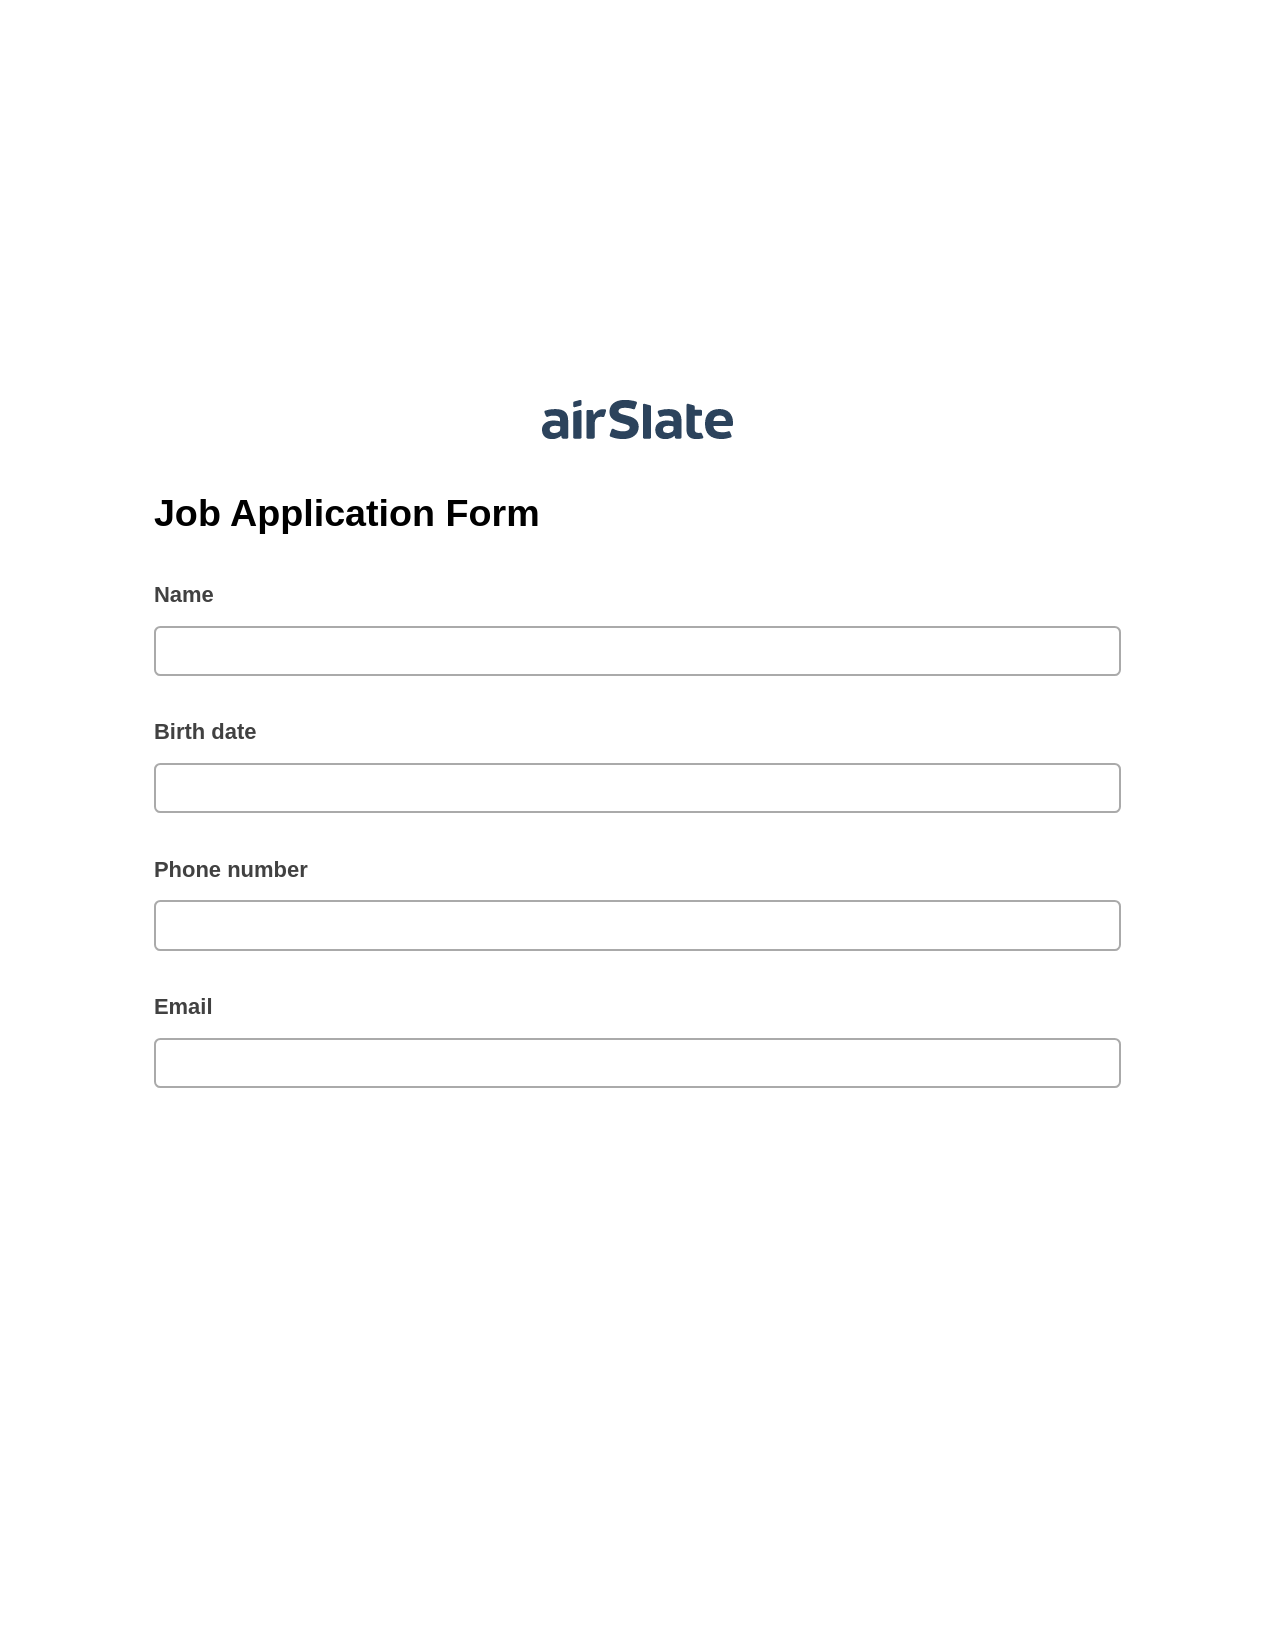 Job Application Form Pre-fill from Excel Spreadsheet Dropdown Options Bot, Export to MS Dynamics 365 Bot, Archive to SharePoint Folder Bot